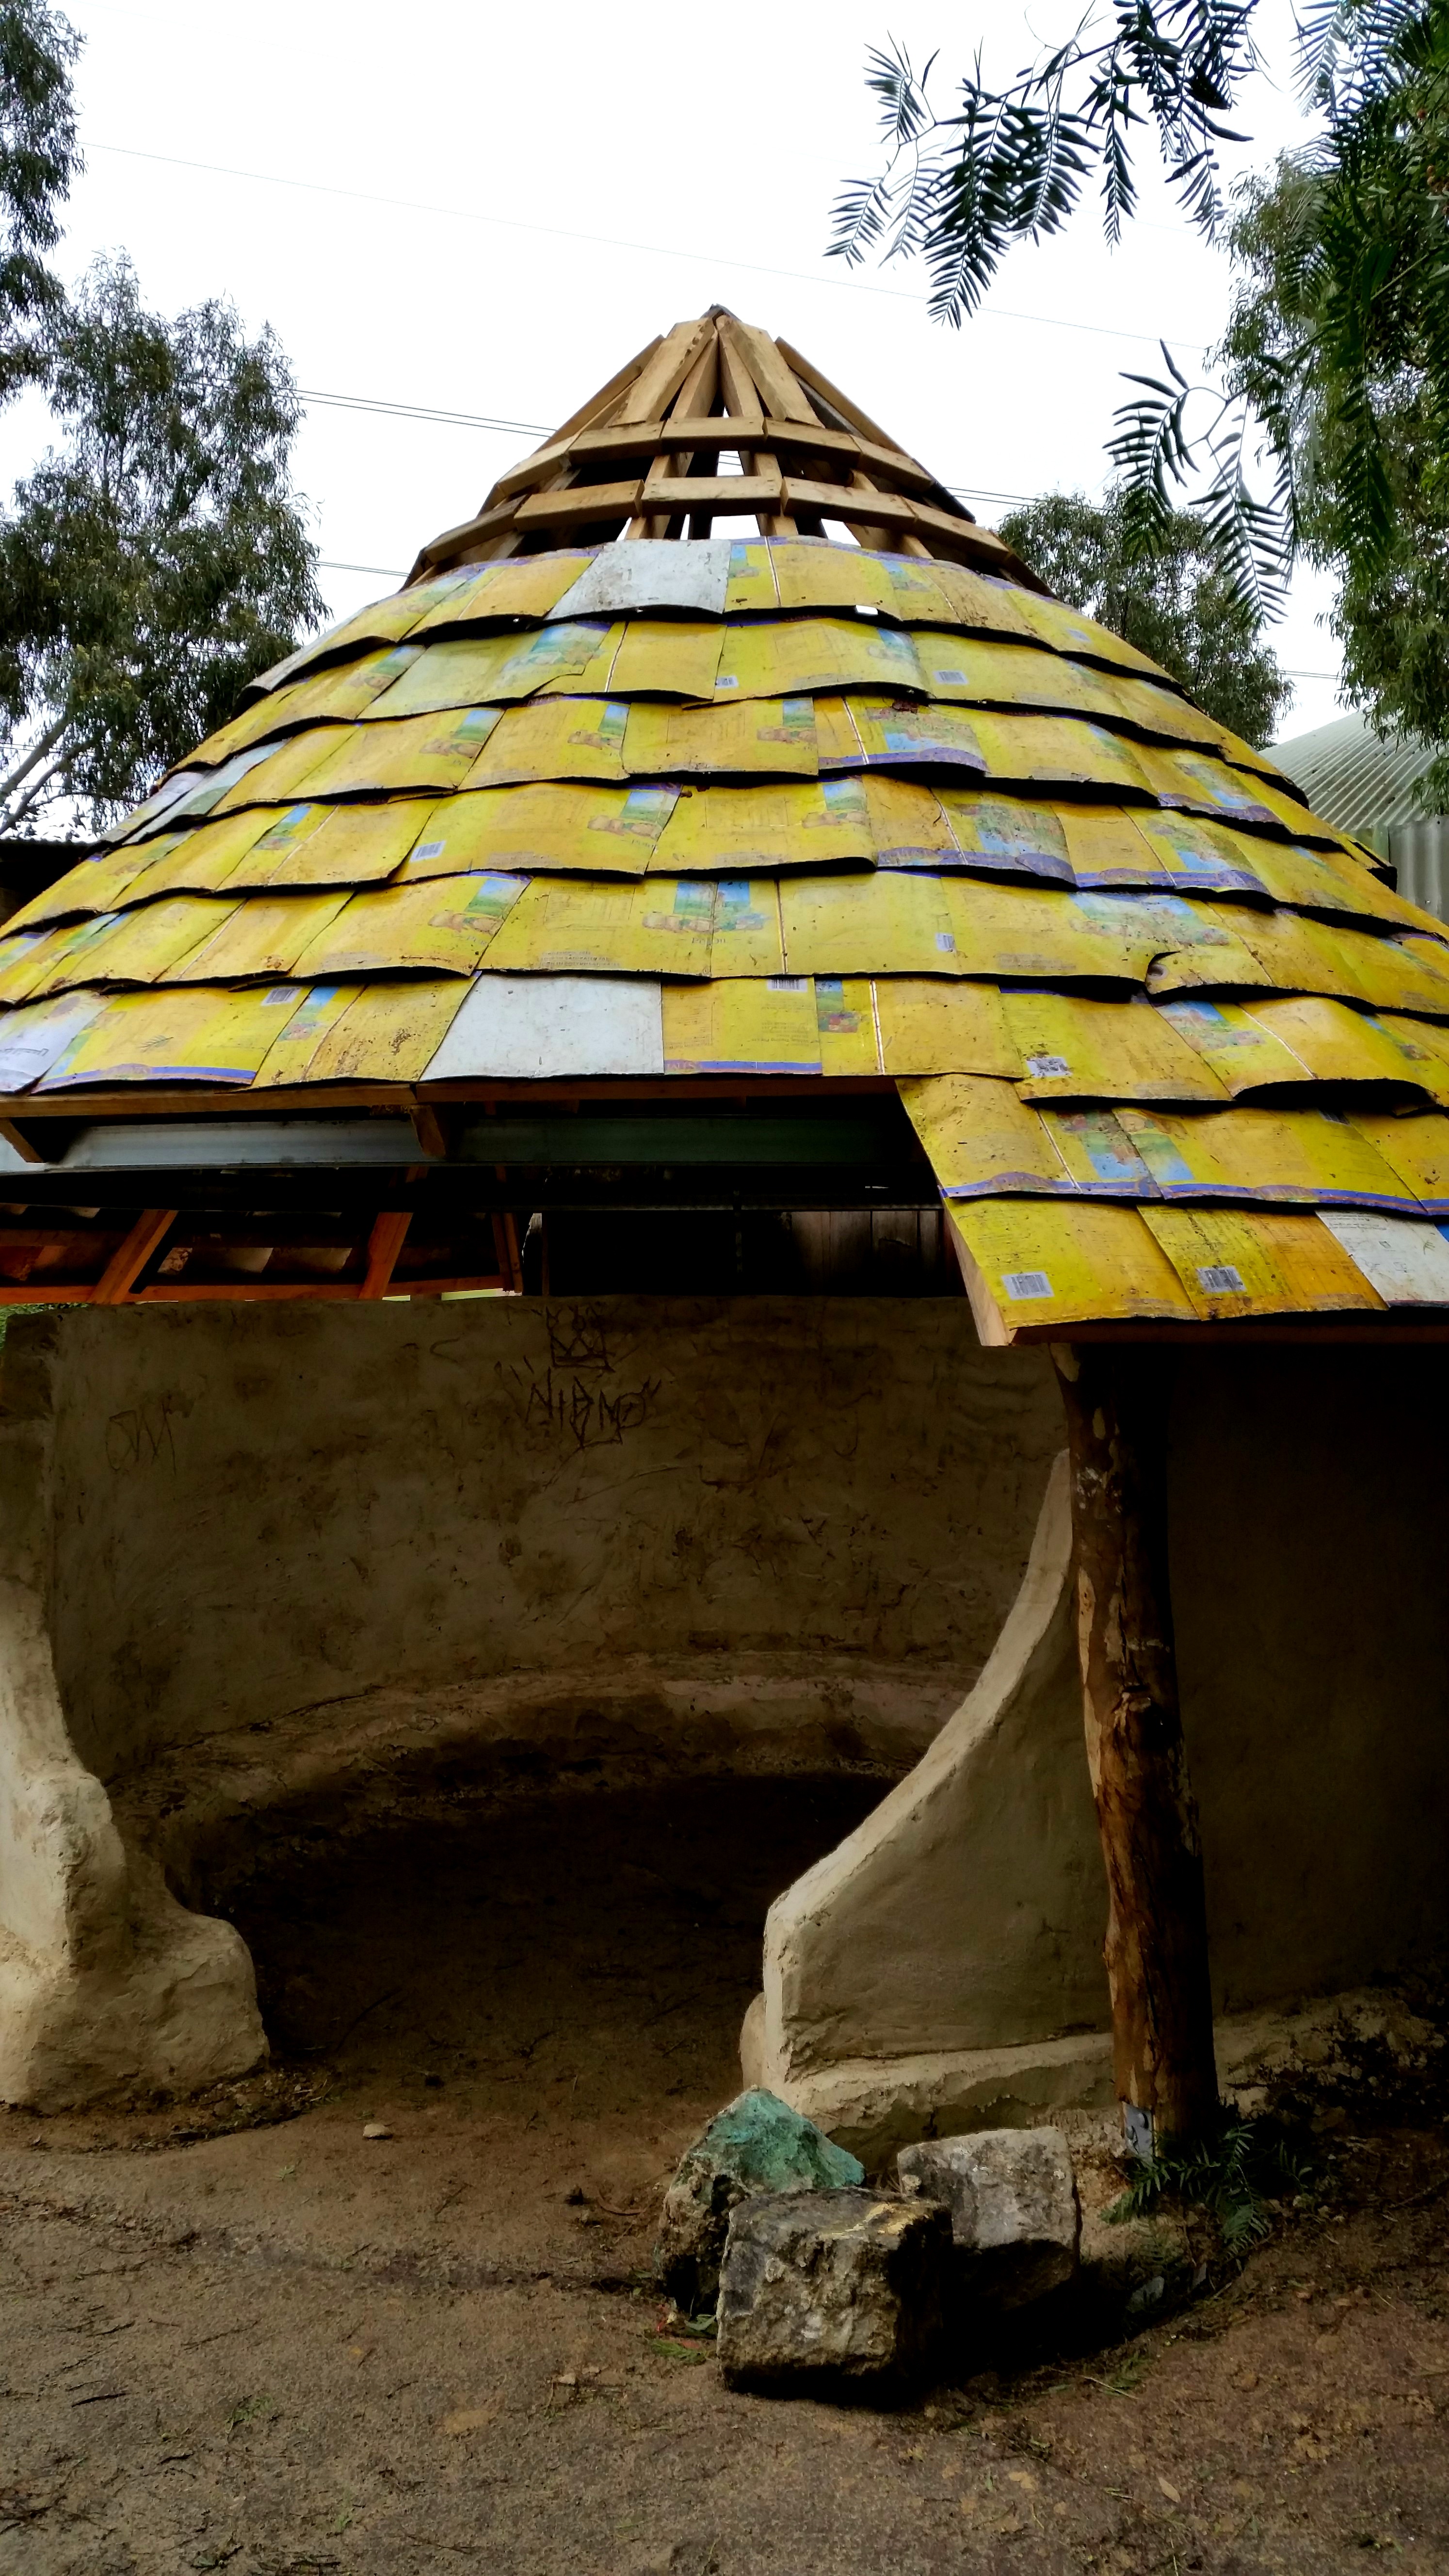 The African Hut gets a revamp after it was vandalised last year.